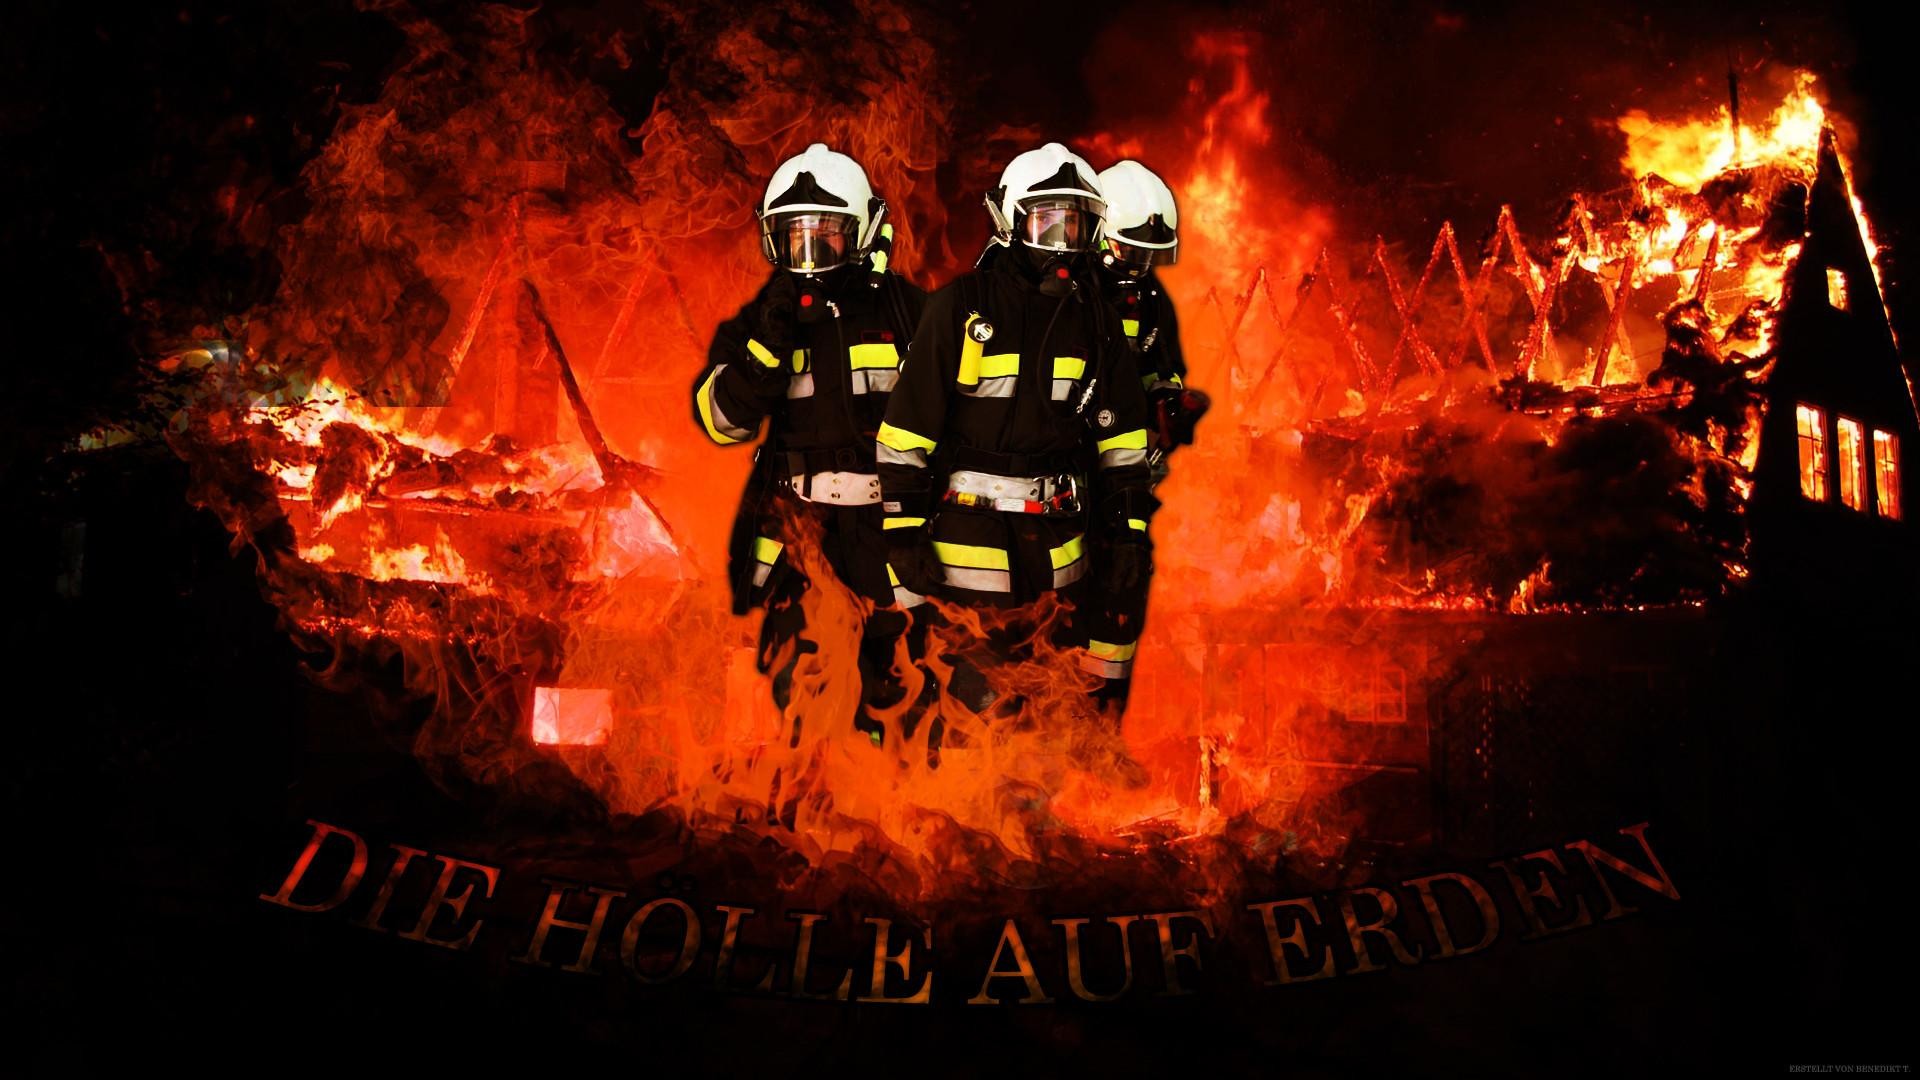 1920x1080 Related Wallpapers: firefighter wallpaper